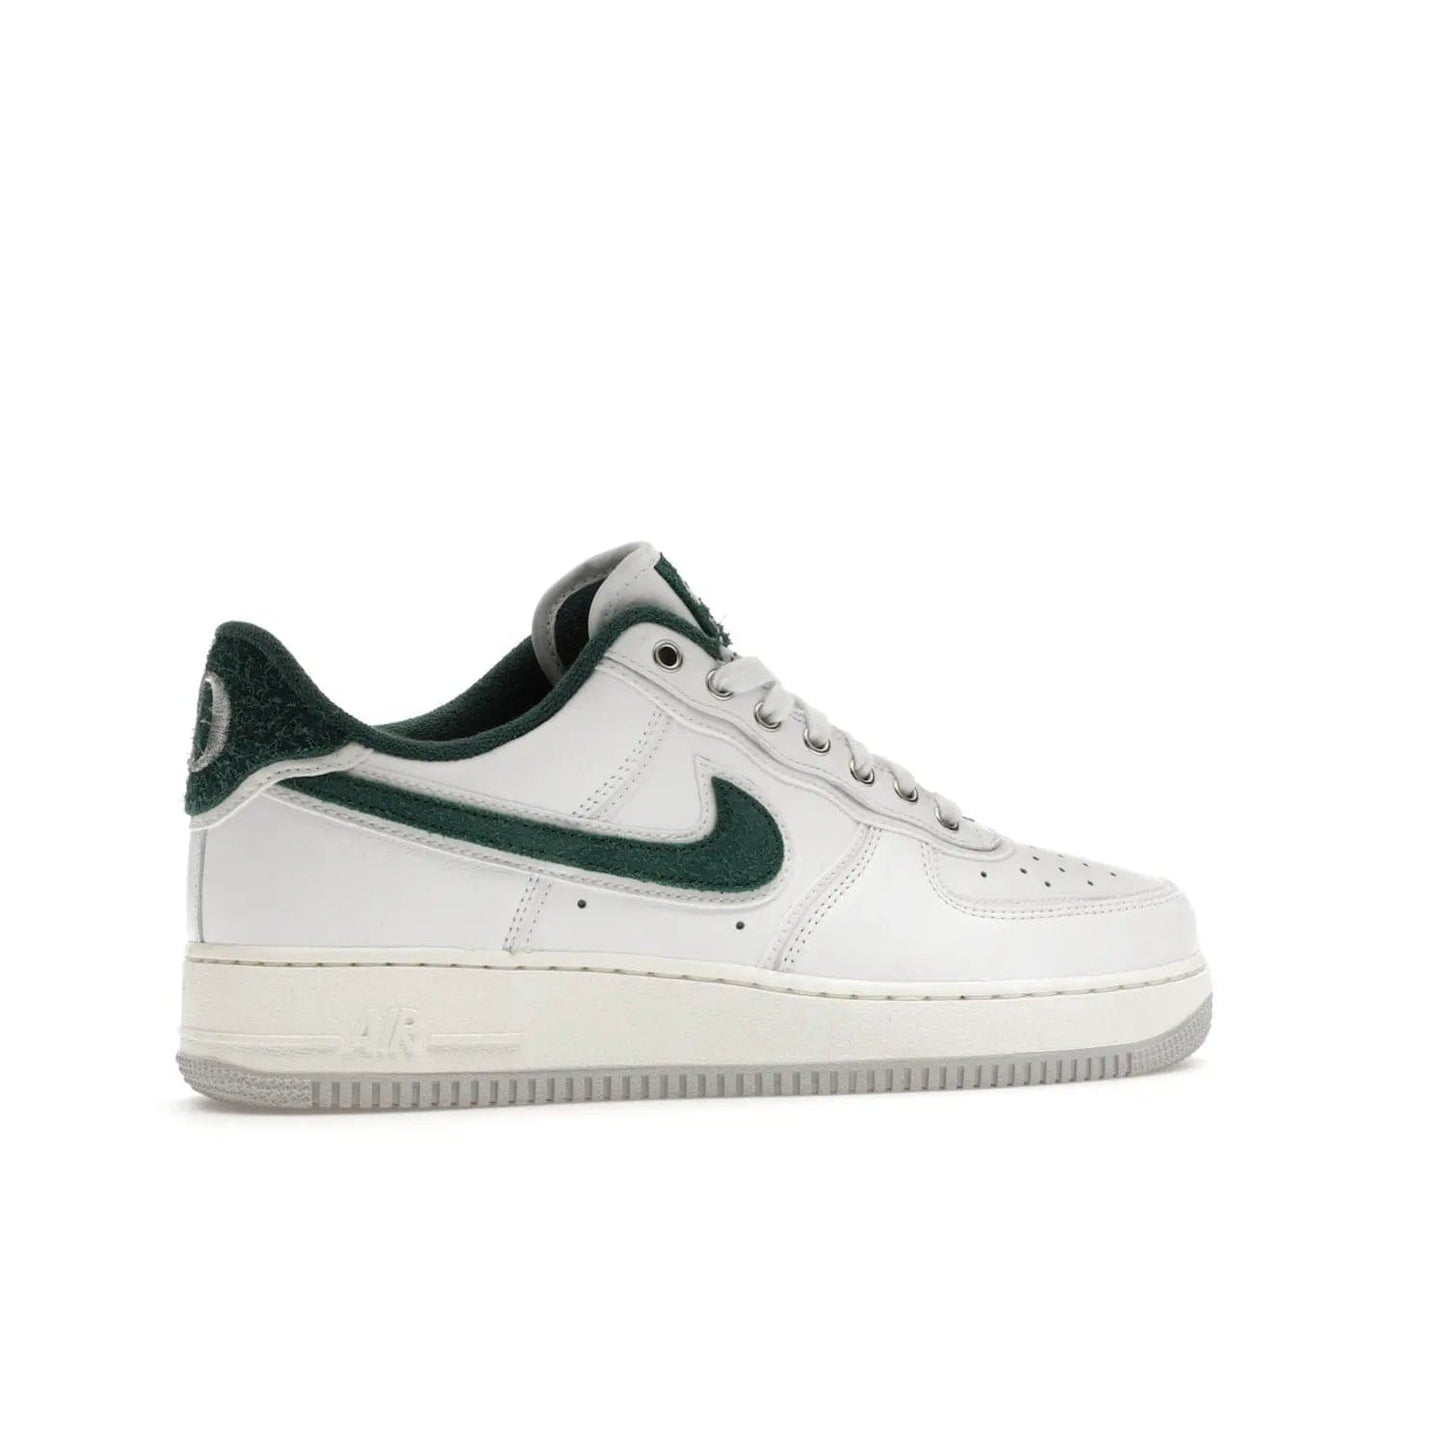 Nike Air Force 1 Low '07 Premium University of Oregon PE - Image 35 - Only at www.BallersClubKickz.com - The Nike Air Force 1 Low '07 Premium. Special Oregon University colorway. White base with green and sail accents. Cushioned rubber midsole. Comfort and style. Support your school!